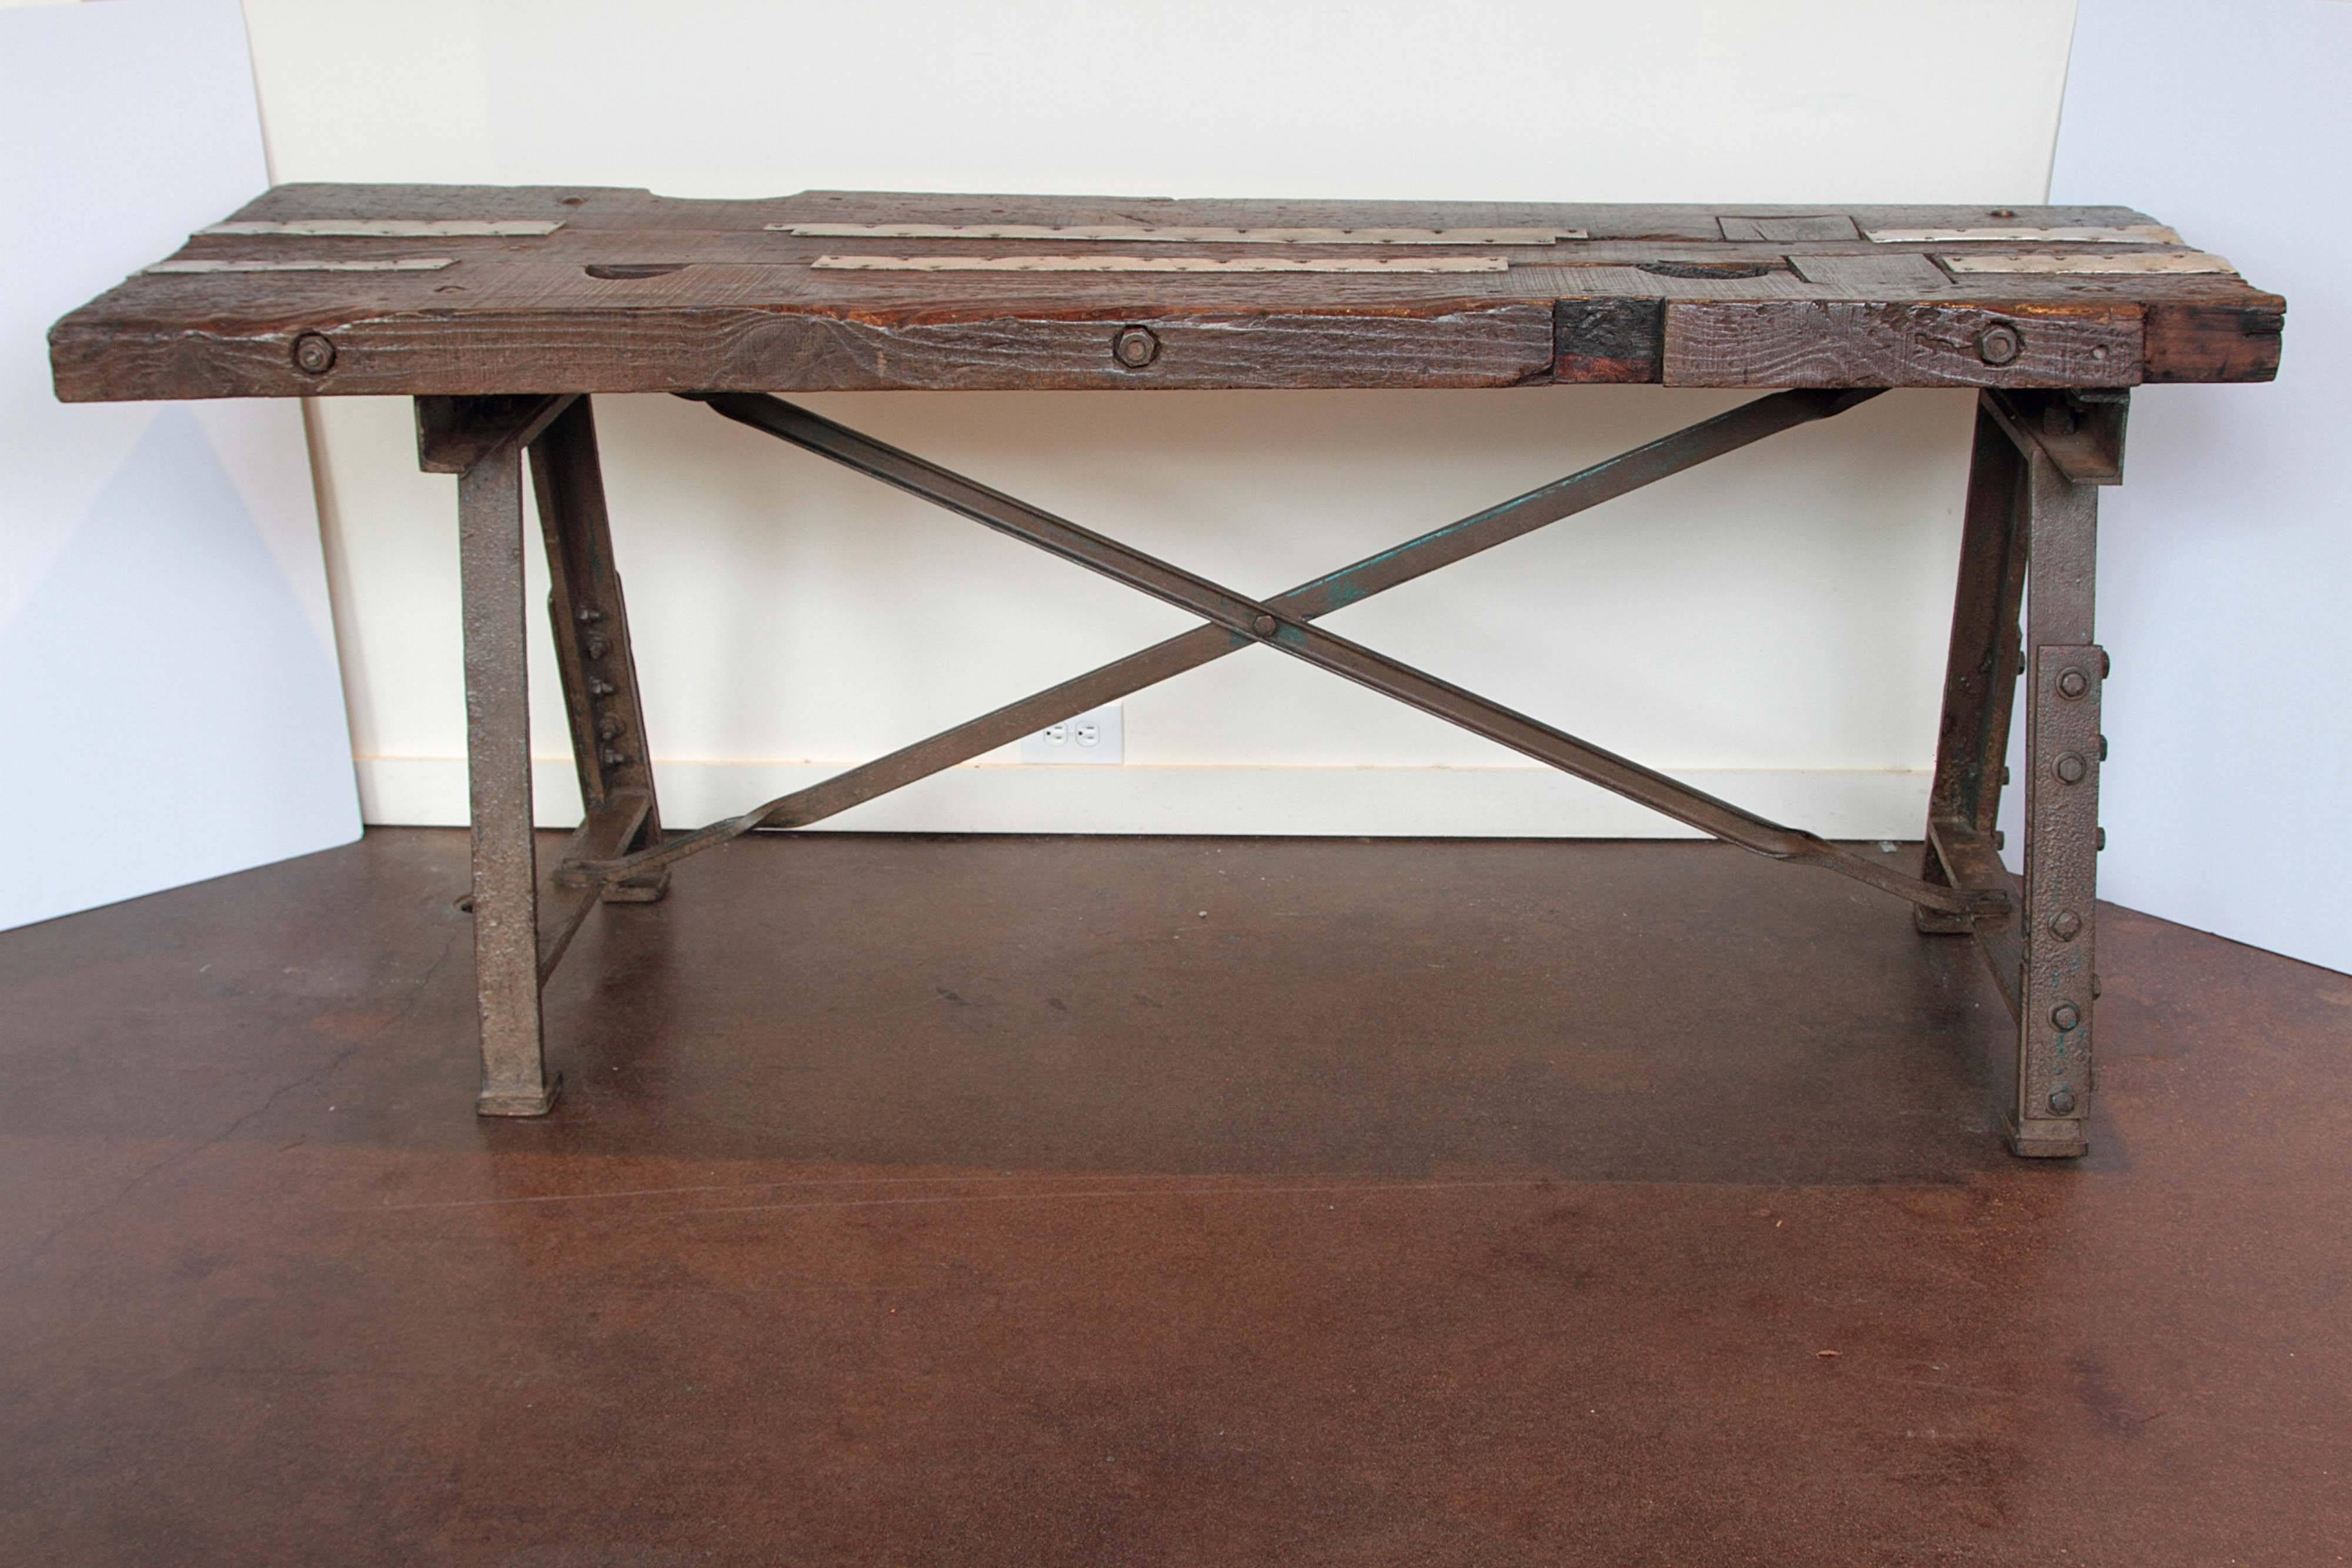 Masculine Industrial Console Table.
Antique French work table from Roubaix area. 
Belonged to a tradesmen's workshop 1920, France.
Original patina of patinated steel base with cast iron bolts. 
Narrow sheets of metal lay up top of walnut wood